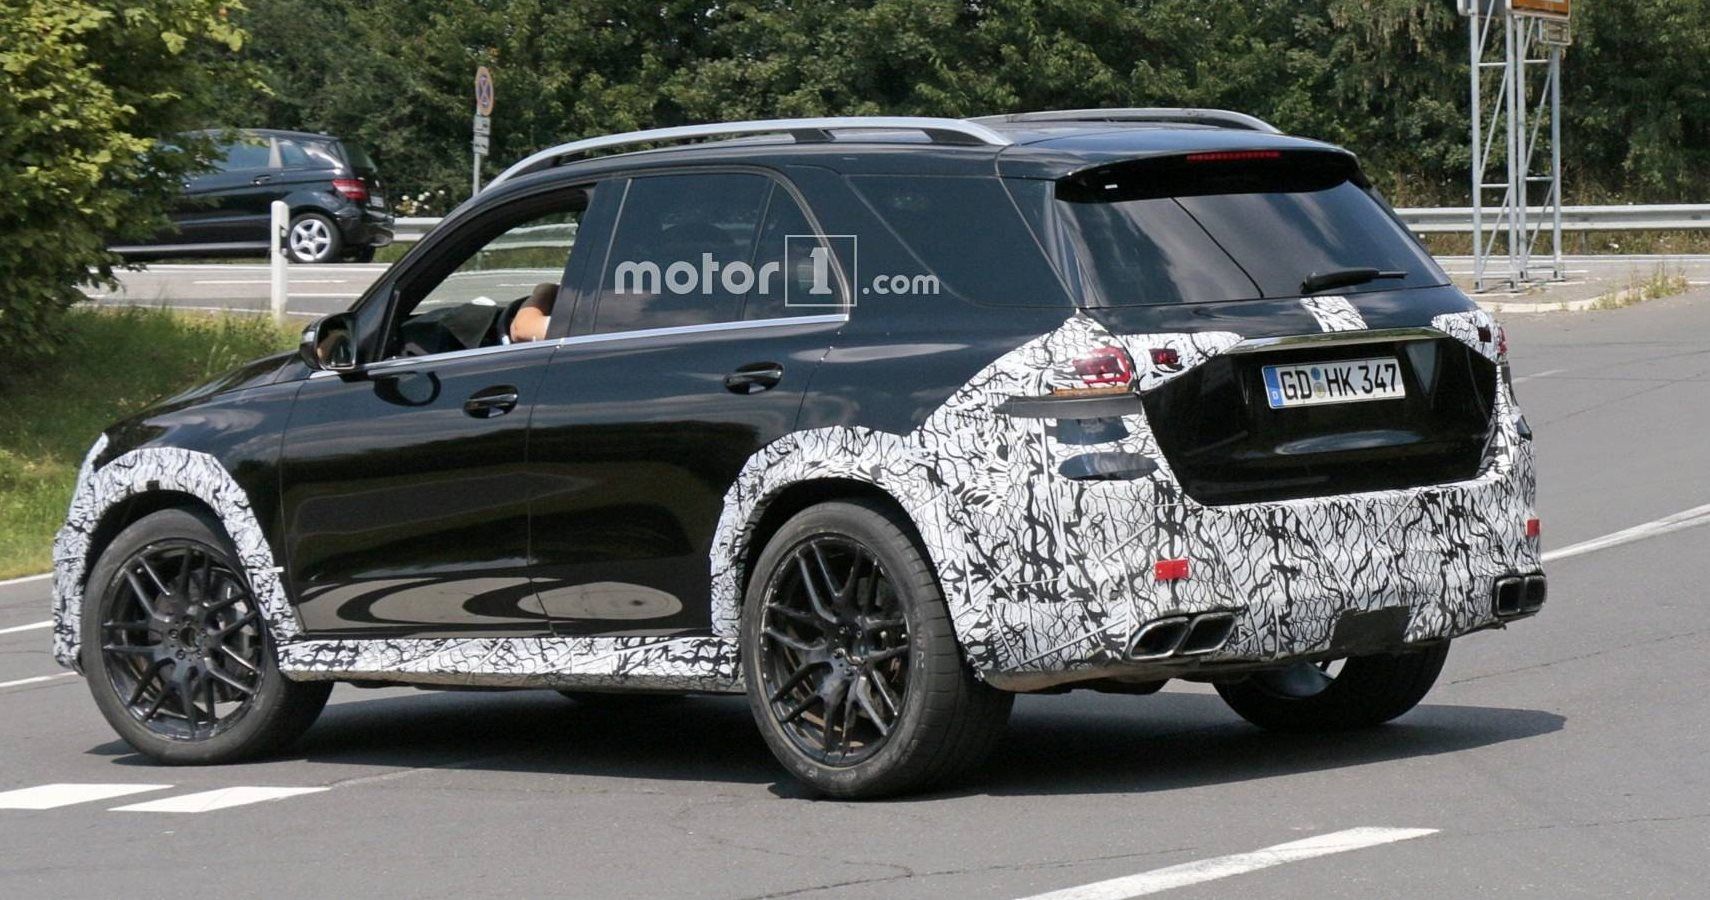 2020 Mercedes-AMG GLE 63 Spotted With Little Camouflage